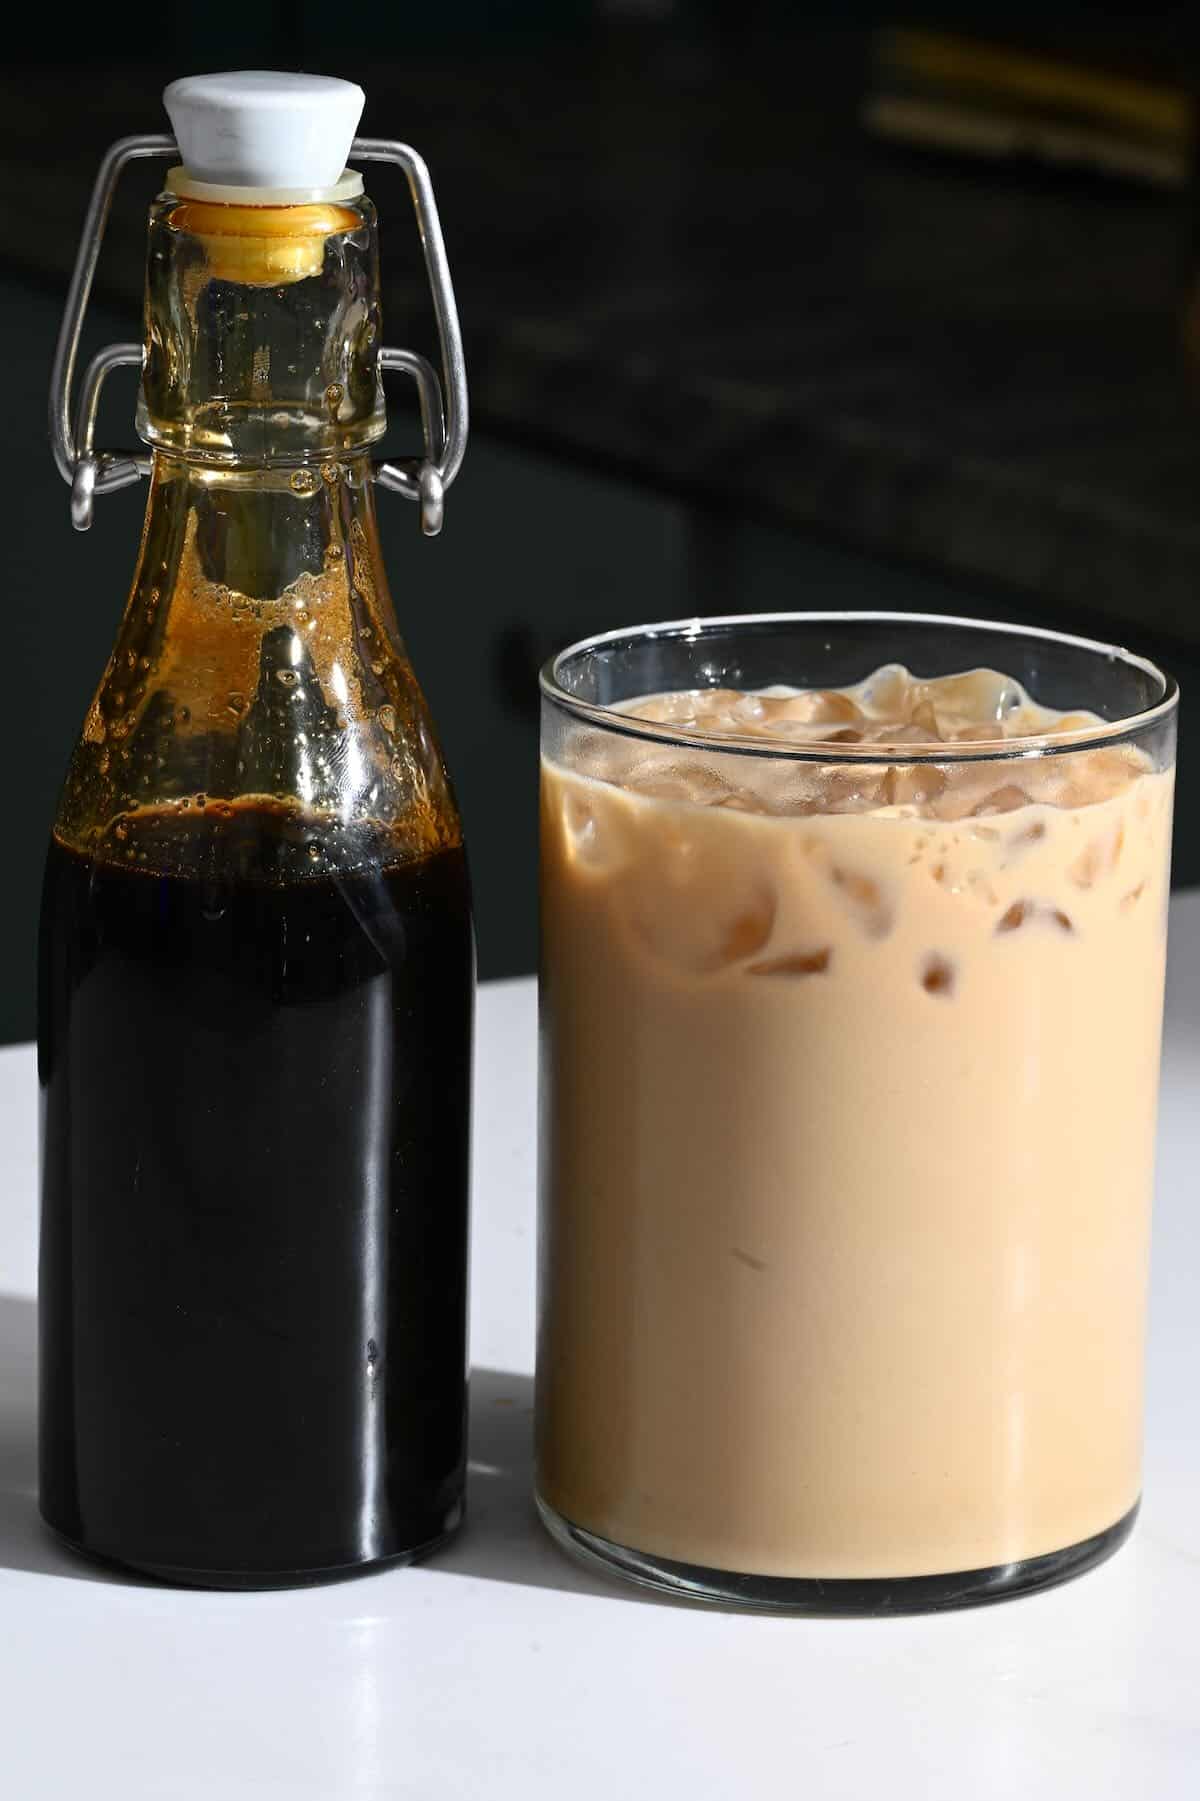 Cafe latte in a glass and coffee syrup in a bottle